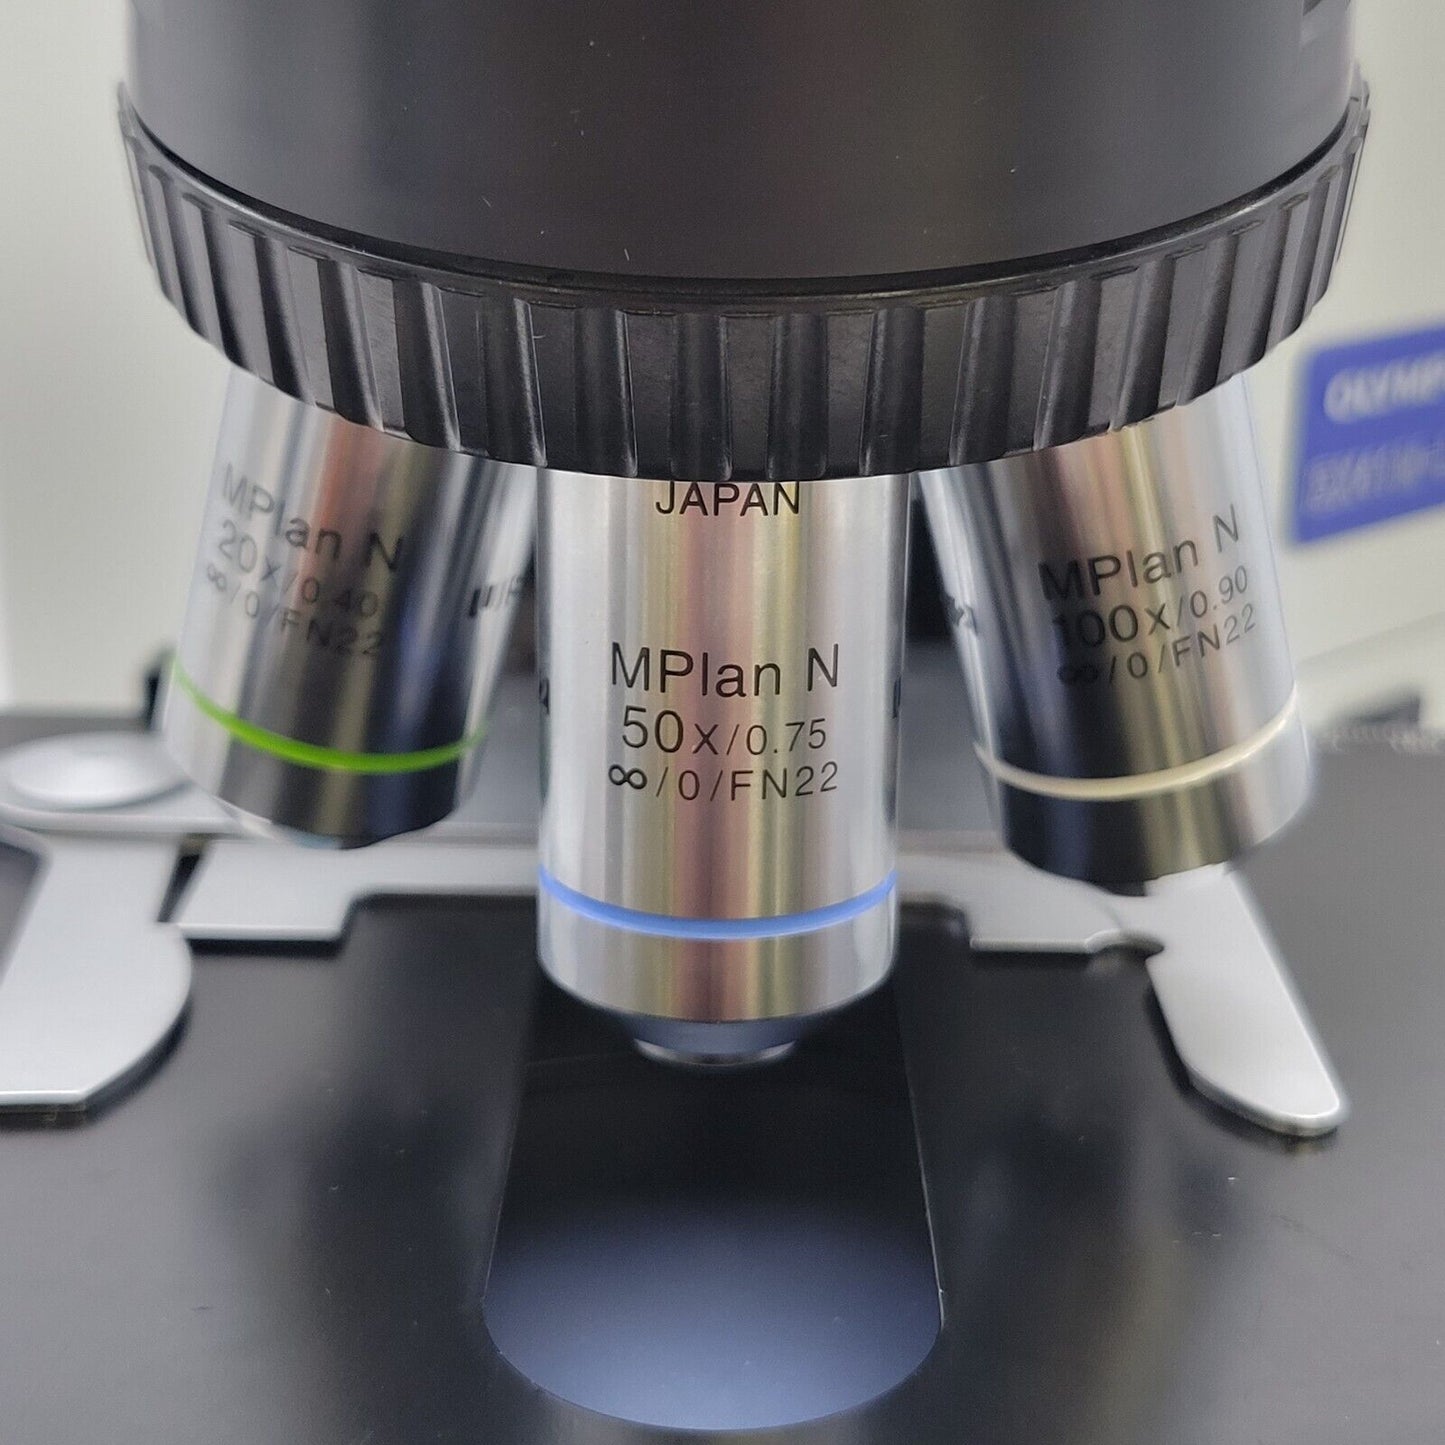 Olympus Microscope BX41M-LED Mettalurgical with Trinocular Head and Camera - microscopemarketplace